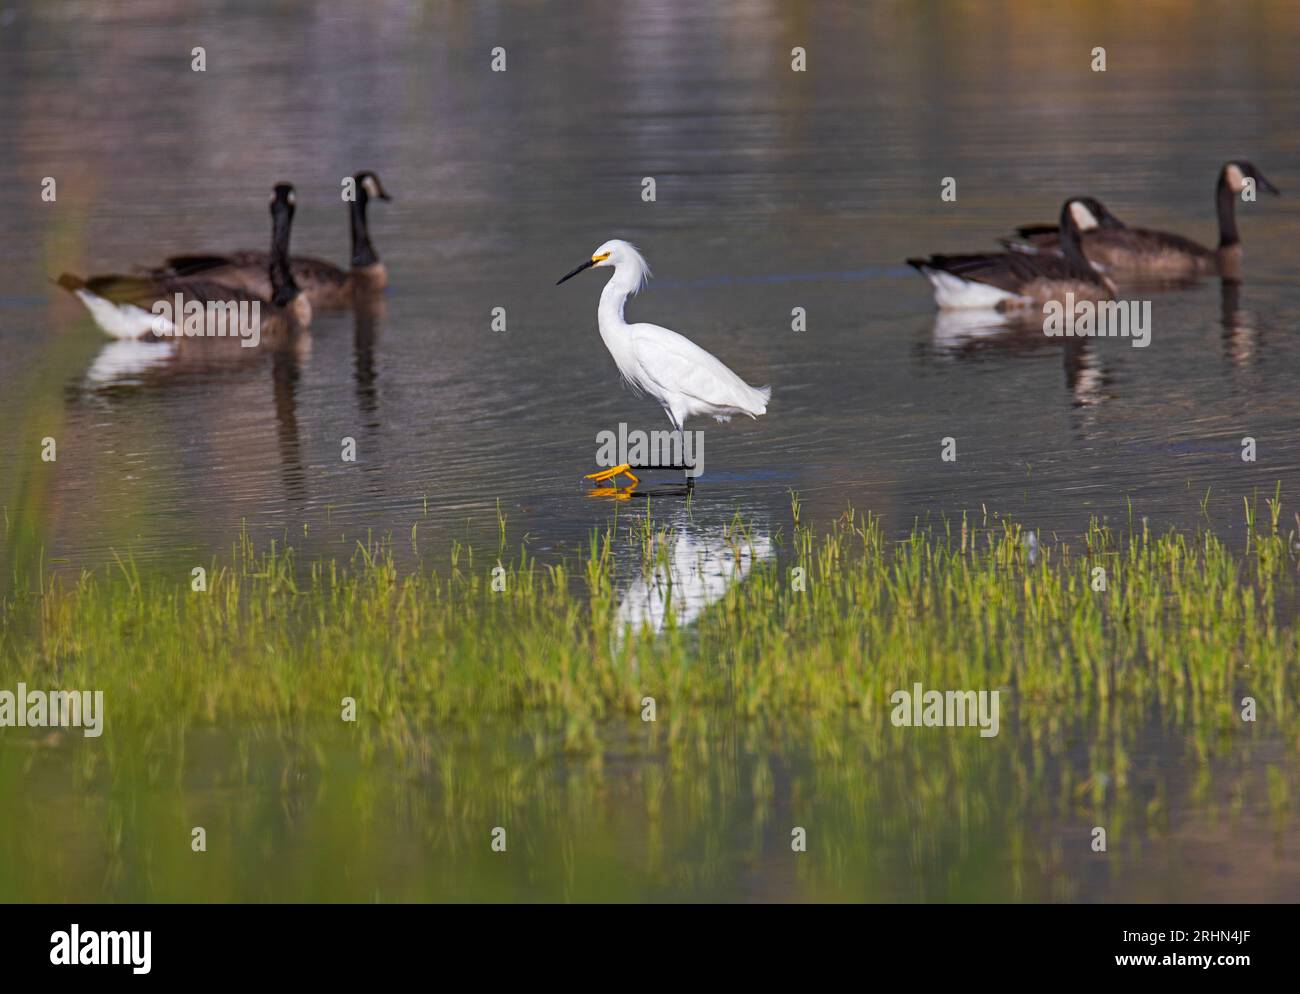 An elegant Snowy Egret (Egretta thula) wades in the water with four Canada Geese (Branta Canadensis) in the background at Farmington Bay WMA, Utah. Stock Photo